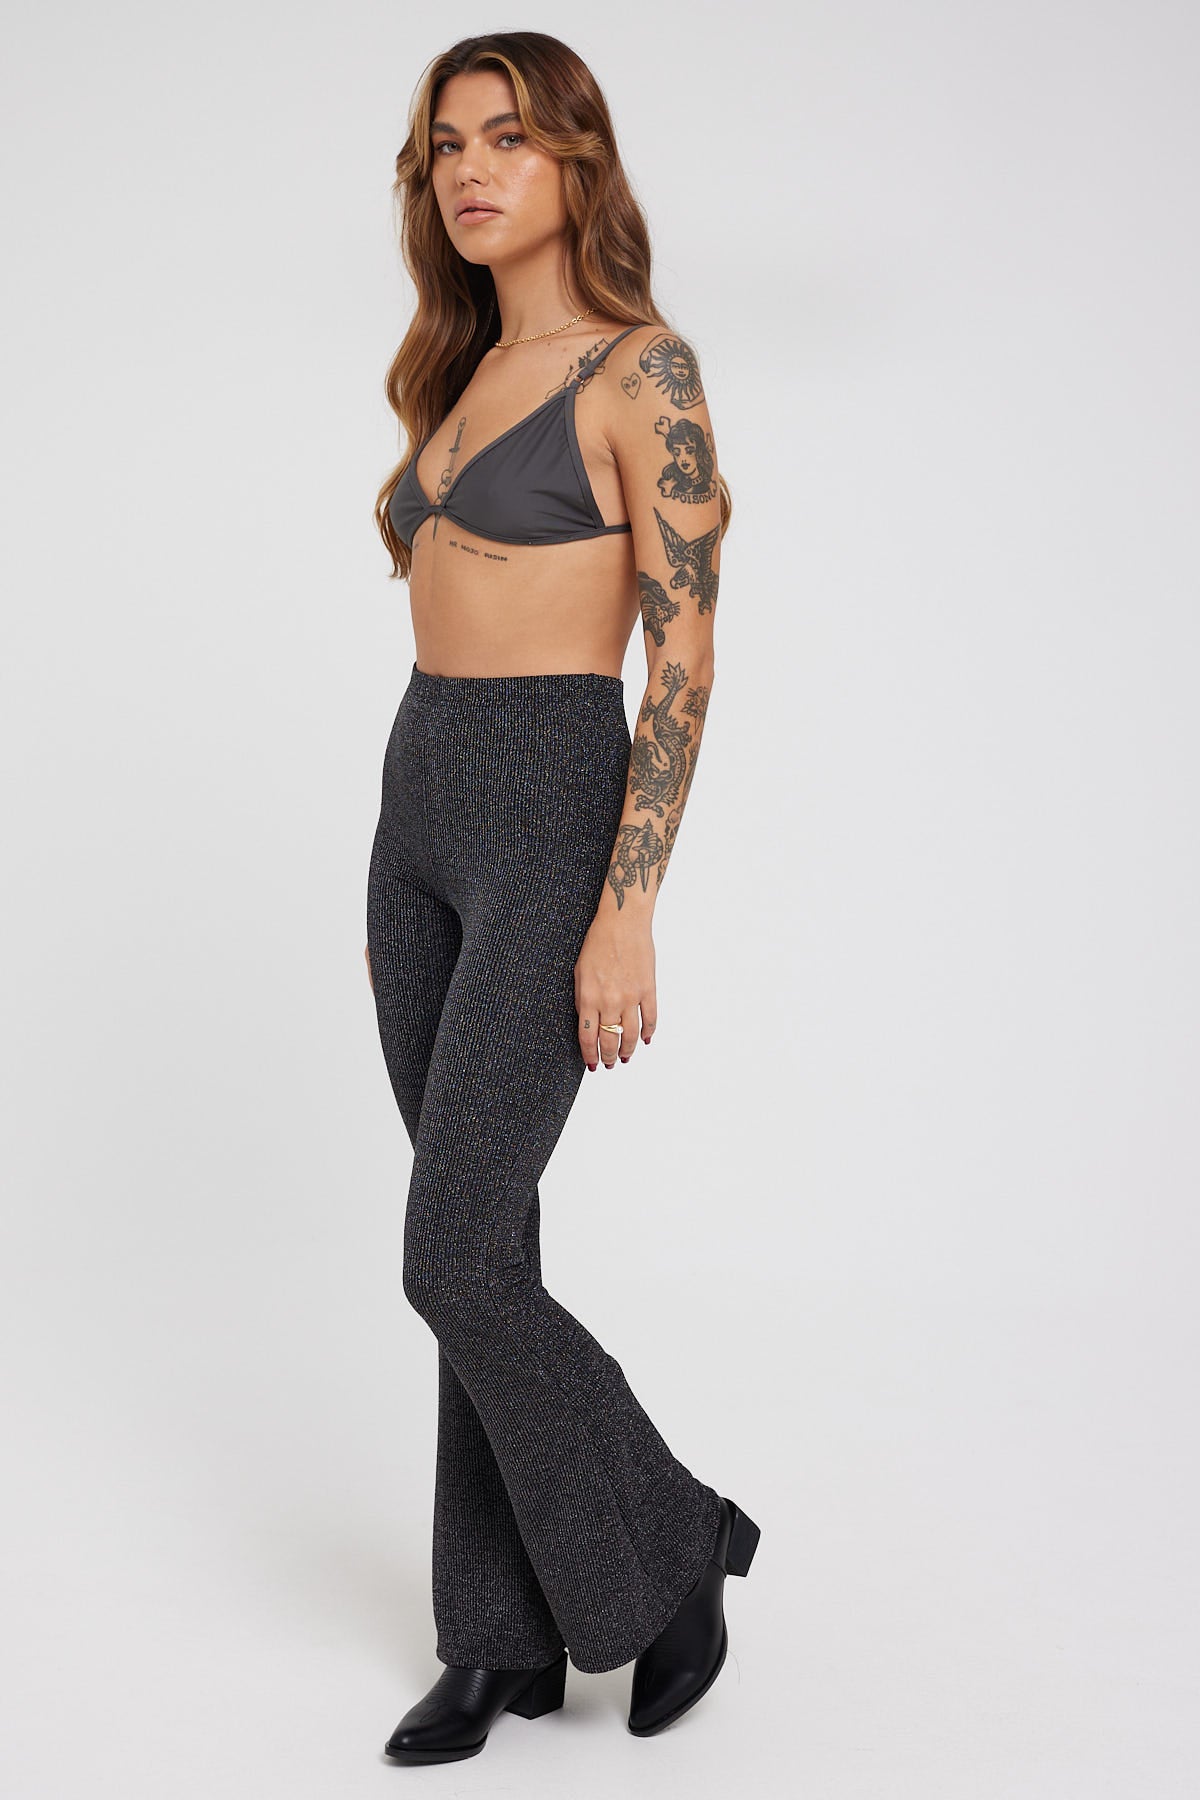 Luck & Trouble Glitter Up Knit Pant Black